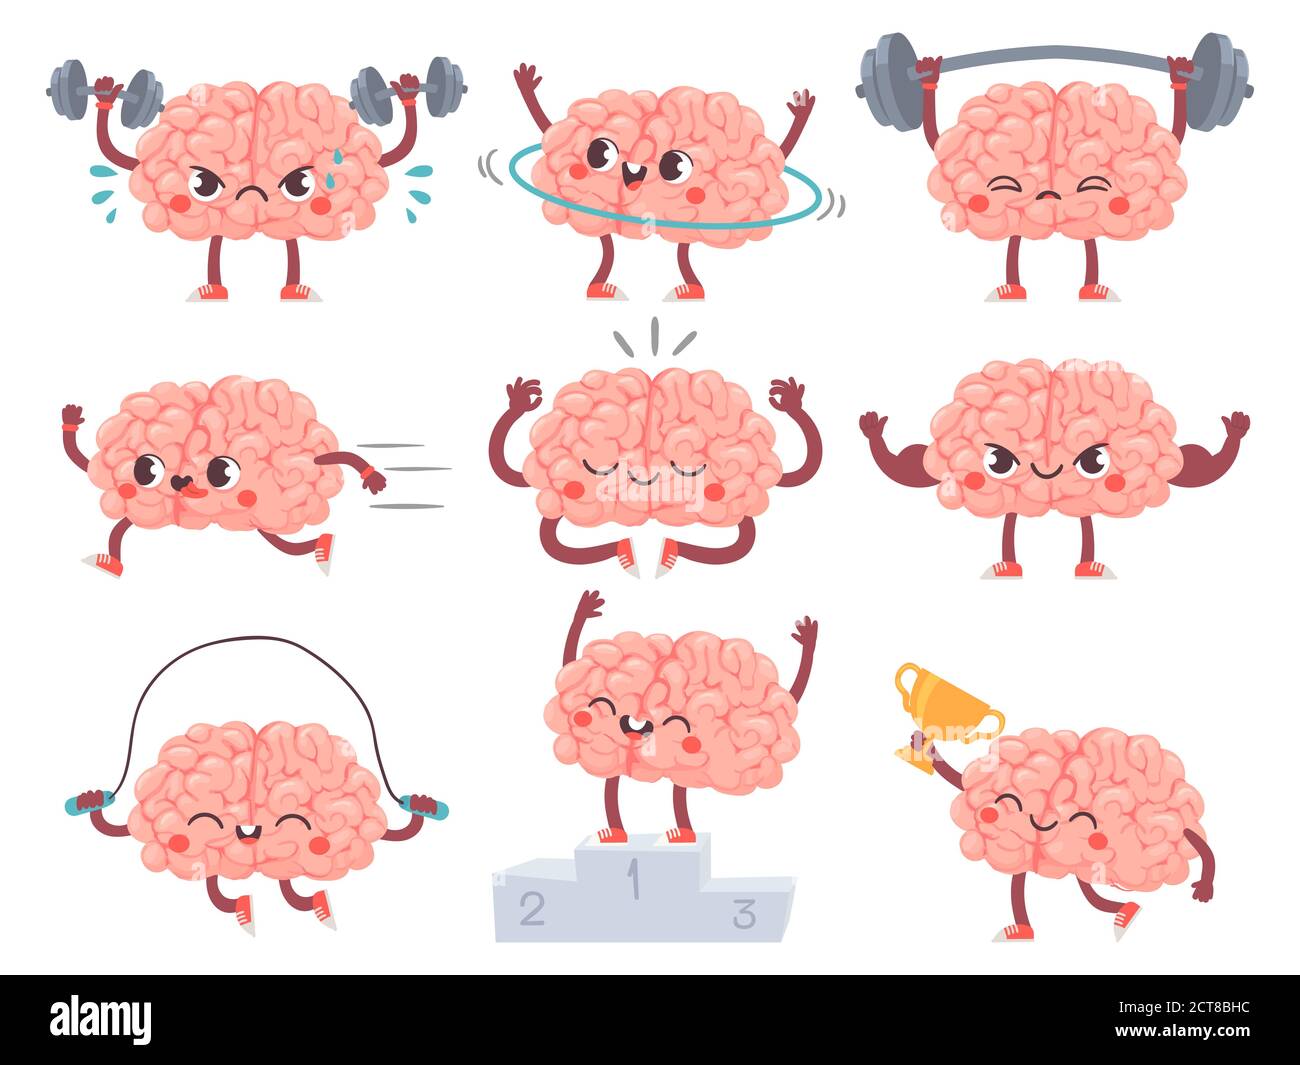 Brain and sport. Comic brains sports activities, training achievements iq metaphor, mental exercise, fitness cartoon vector characters. Sport brain ch Stock Vector